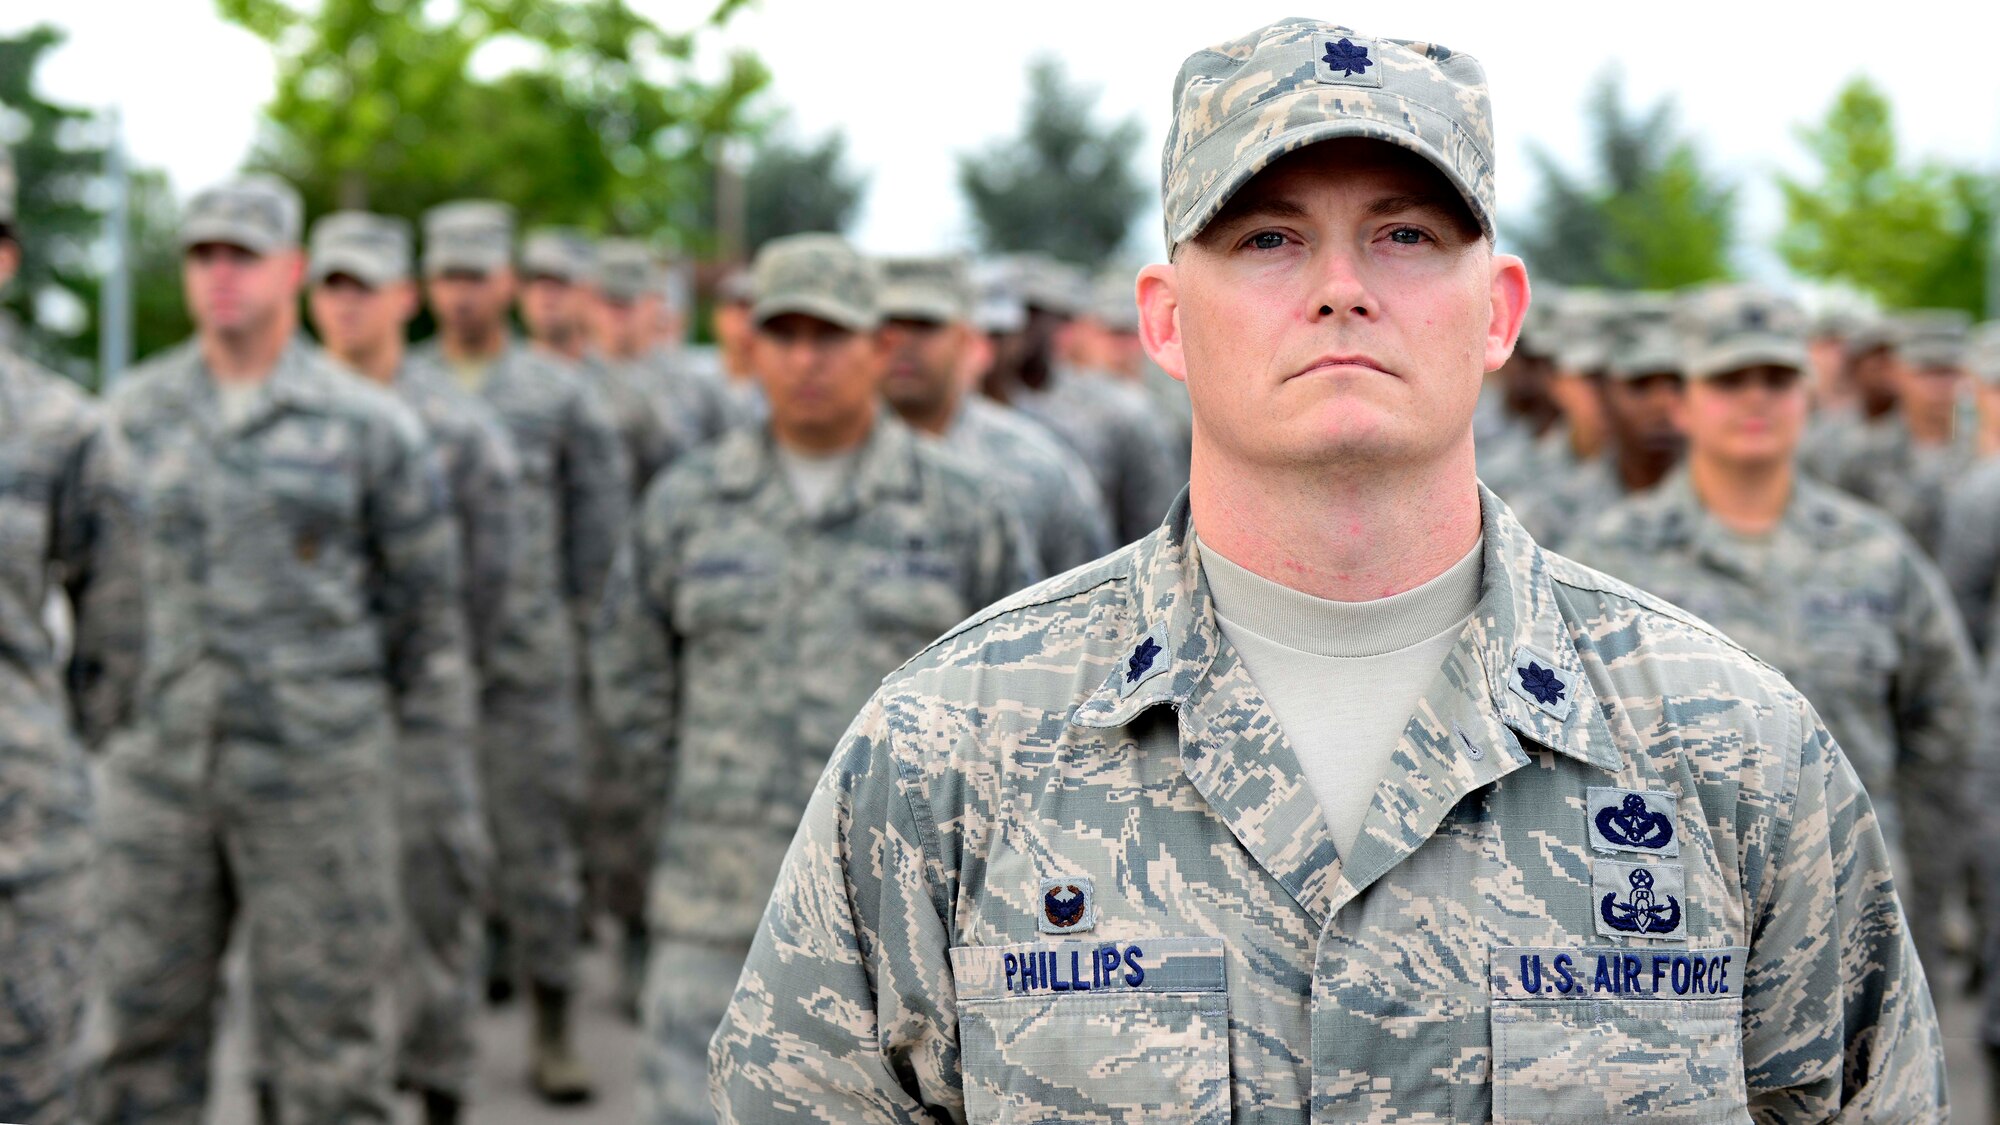 U.S. Air Force Lt. Col. Dennis Phillips, 31st Civil Engineer Squadron commander, leads a formation of Airmen during the Prisoner of War/Missing in Action Remembrance Week retreat ceremony Sept. 17, 2015, at Aviano Air Base, Italy. According to the Defense POW/MIA Accounting Agency, there are still 83,114 service members, since World War II, who are unaccounted for. (U.S. Air Force photo by Senior Airman Areca T. Bell/Released)